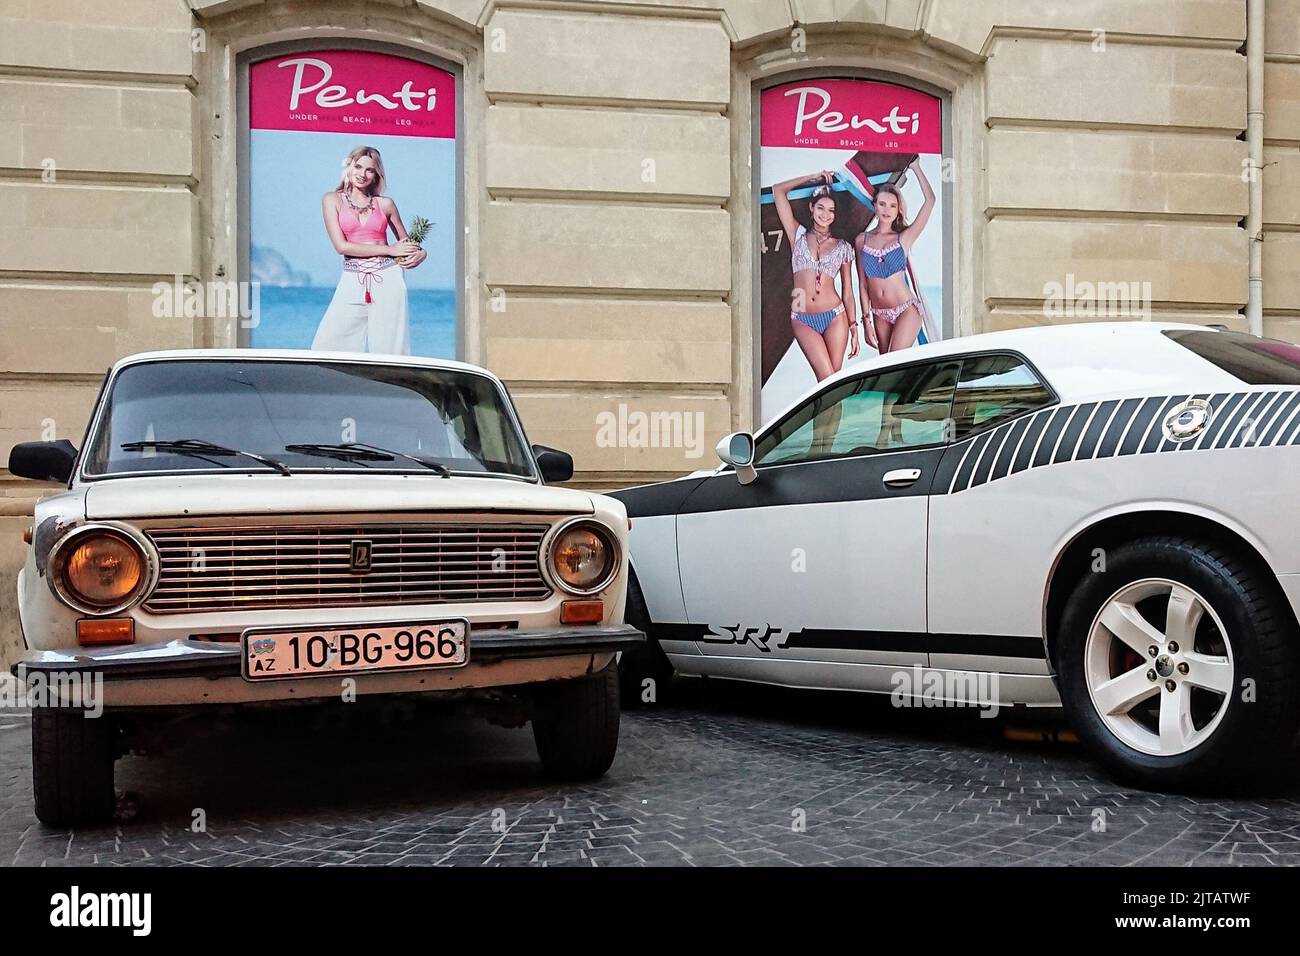 A Russian-made Lada parked next to an American muscle car in Baku, Azerbaijan Stock Photo